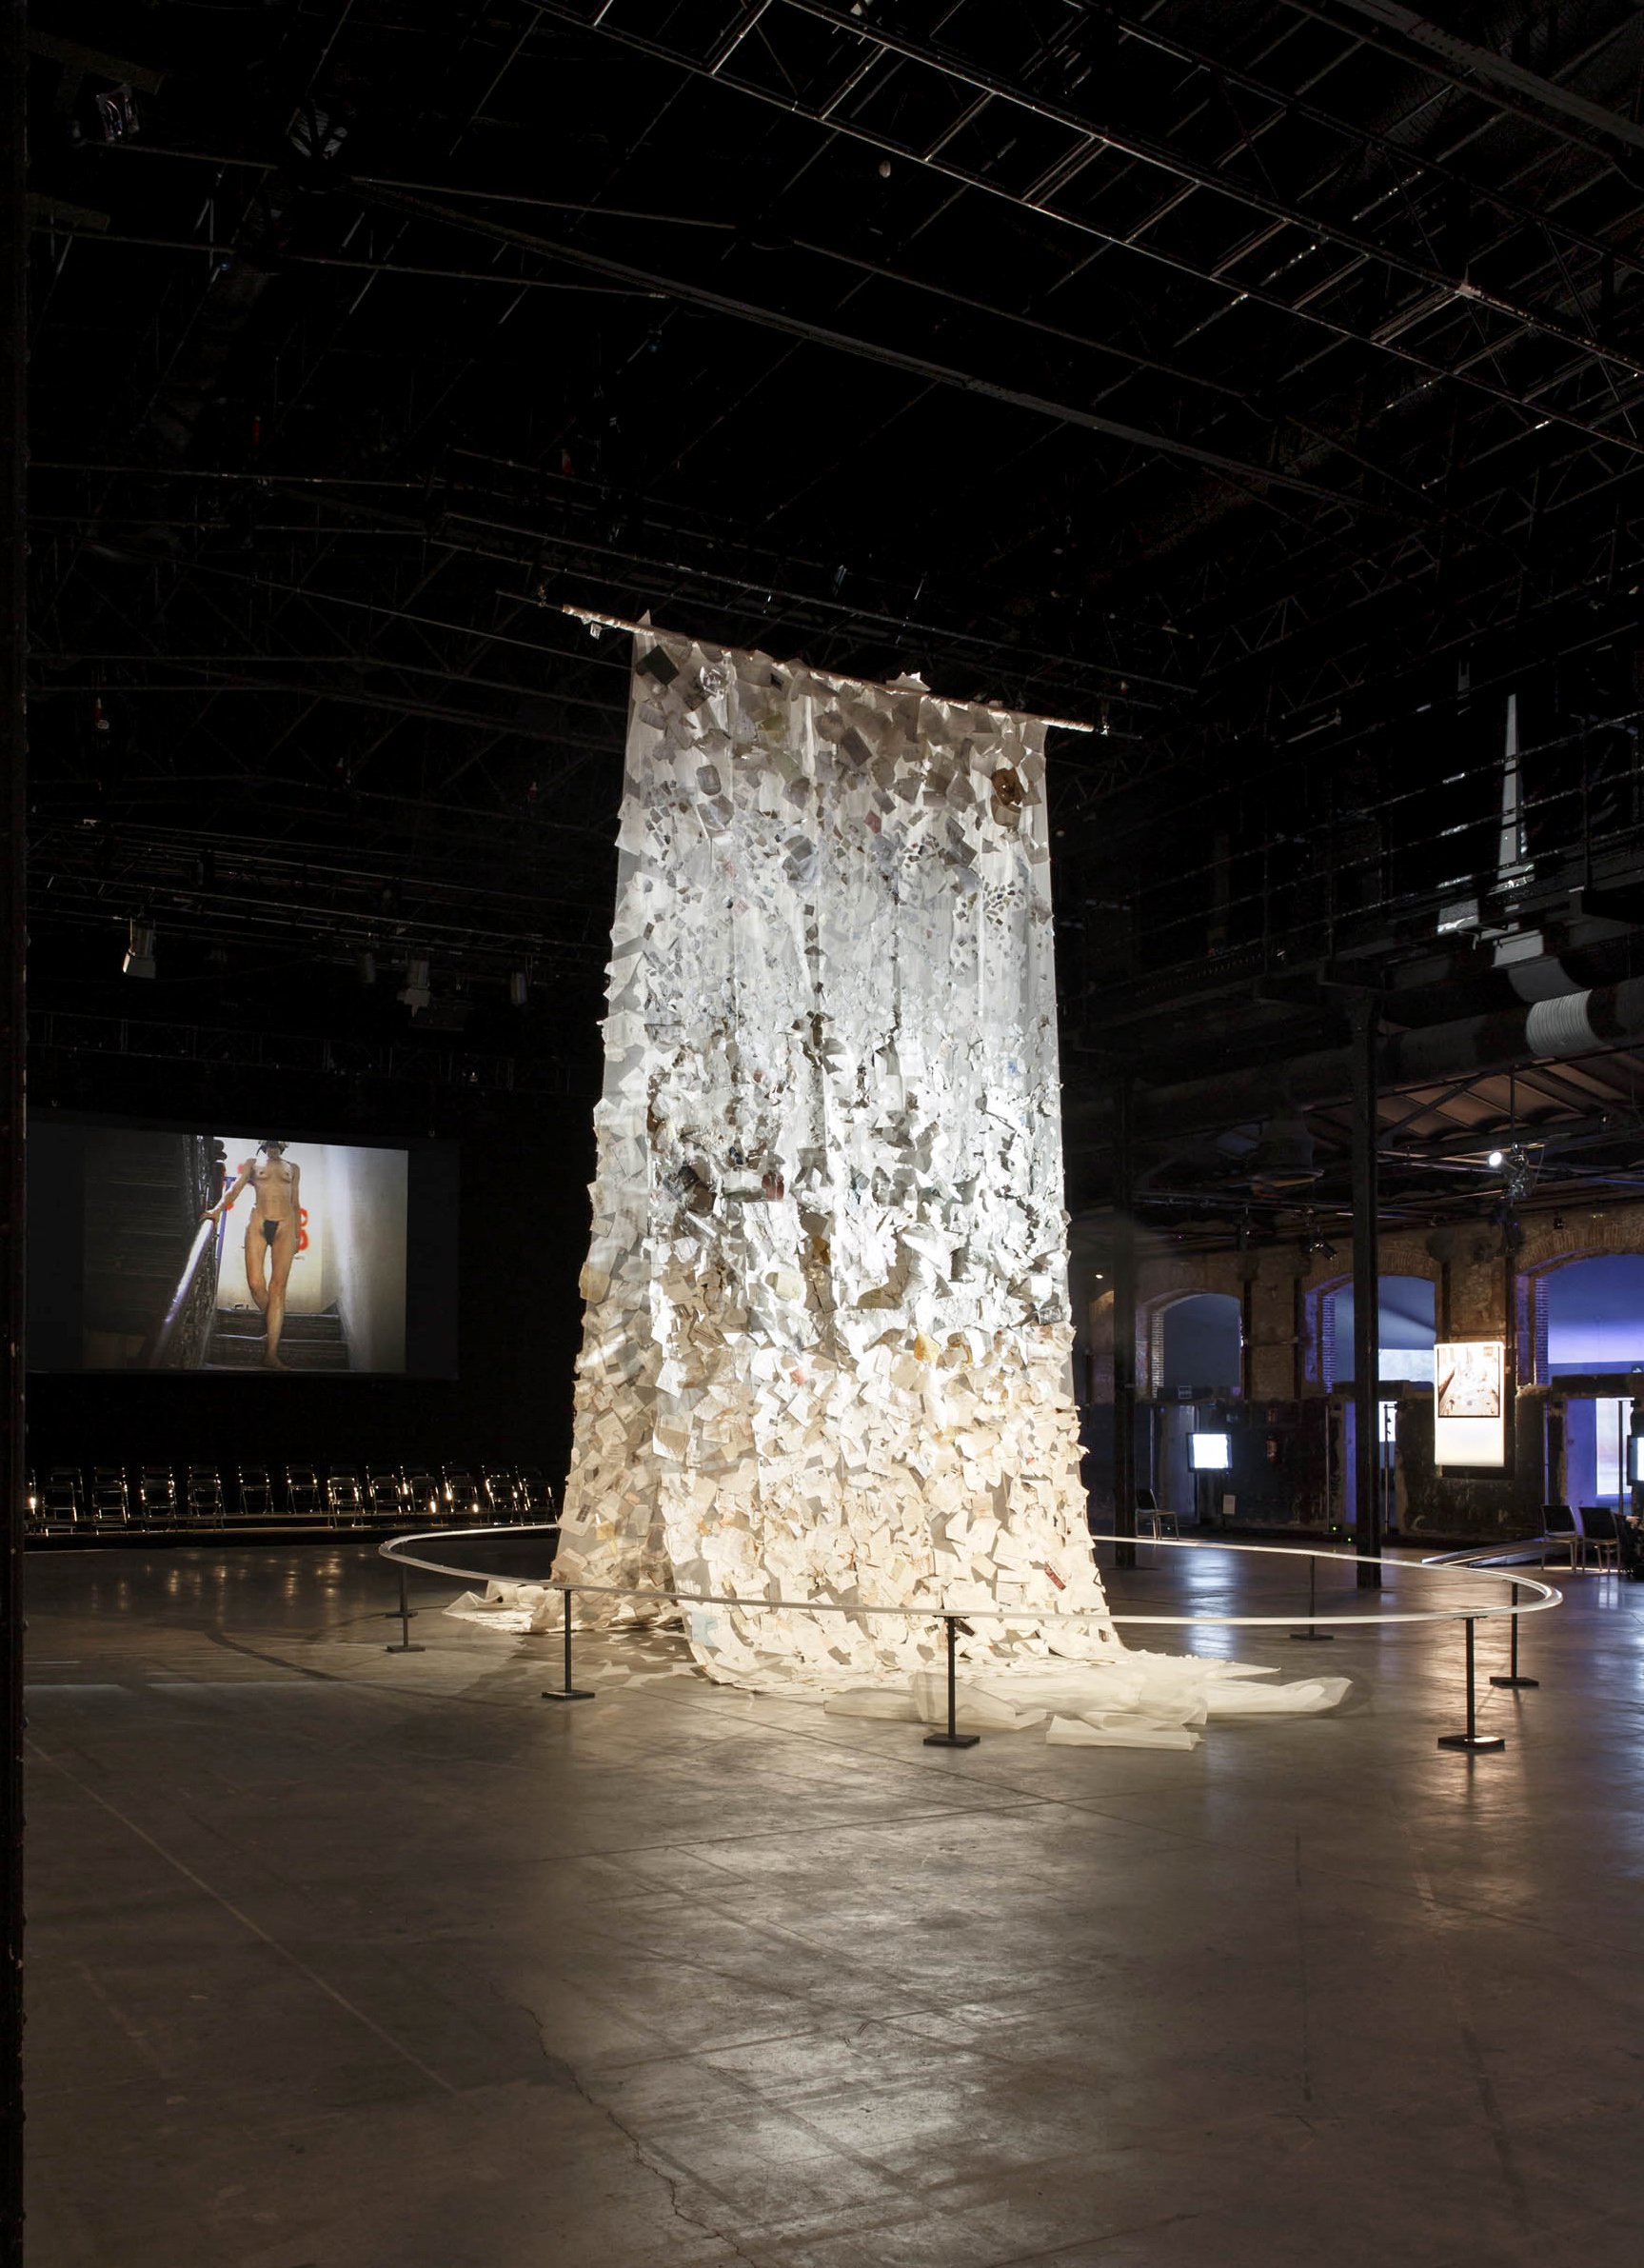  A Chant, Installation View   2019    An Archive of Dust , Naves Matadero, Madrid   Curated by Mateo Feijóo   Photographed by Pablo Gómez-Ogando Rodríguez  